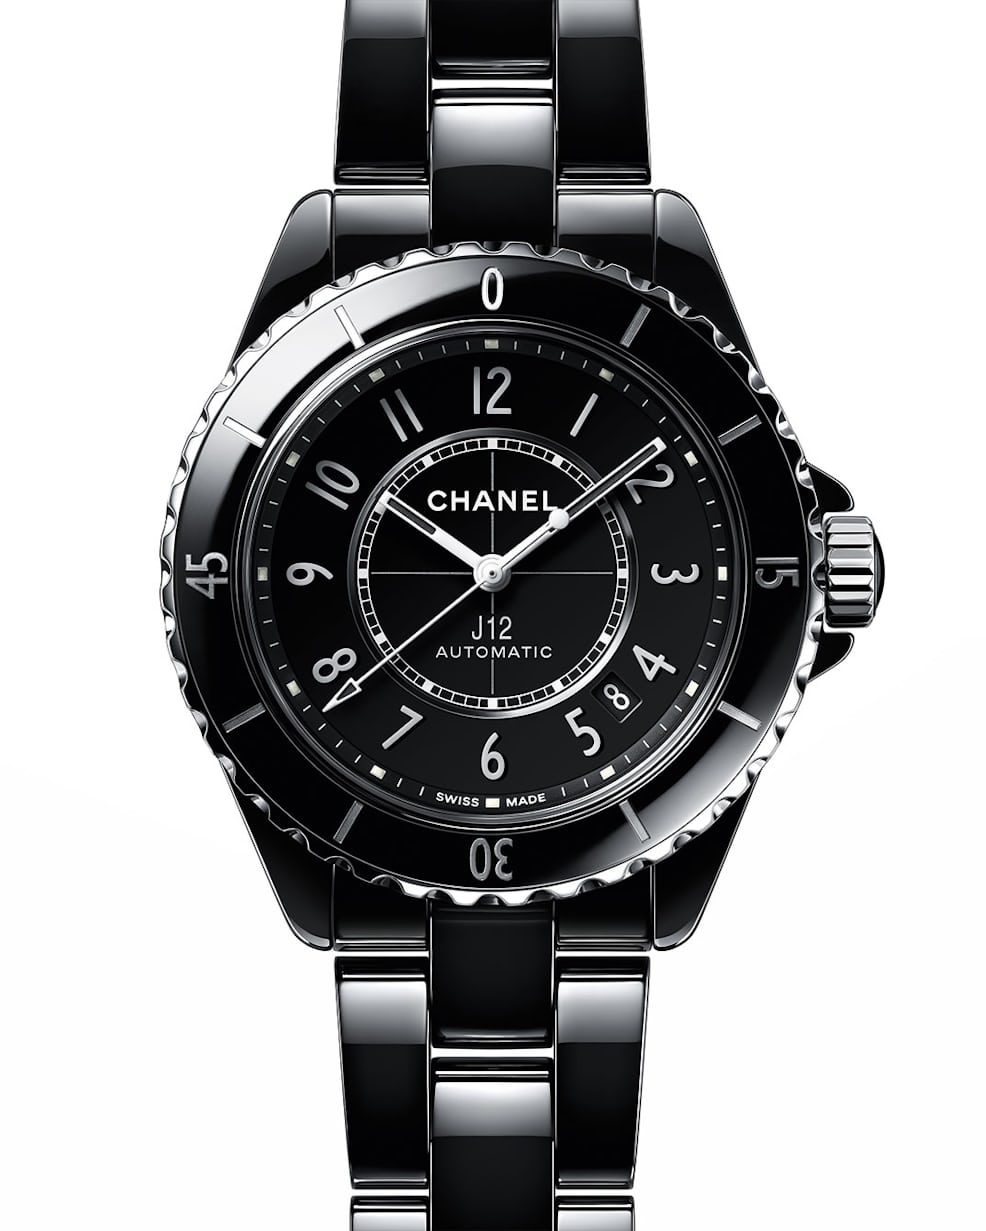 Introducing: The New And Improved Chanel J12 (Live Pics & Pricing) -  Hodinkee